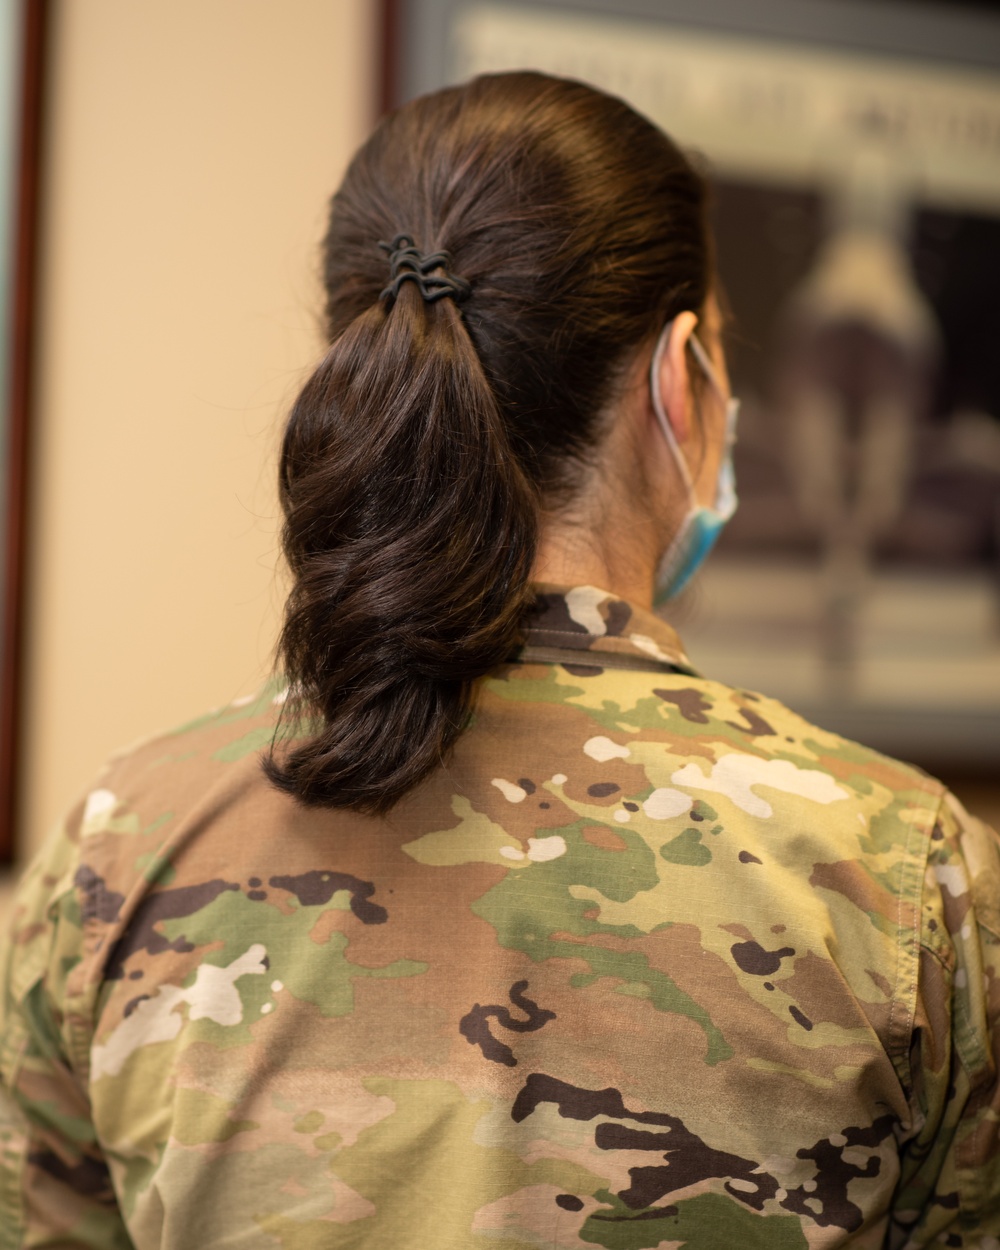 Photo of Tech. Sgt. Cher Schwein displaying the new hairstyle allowed for Air Force women